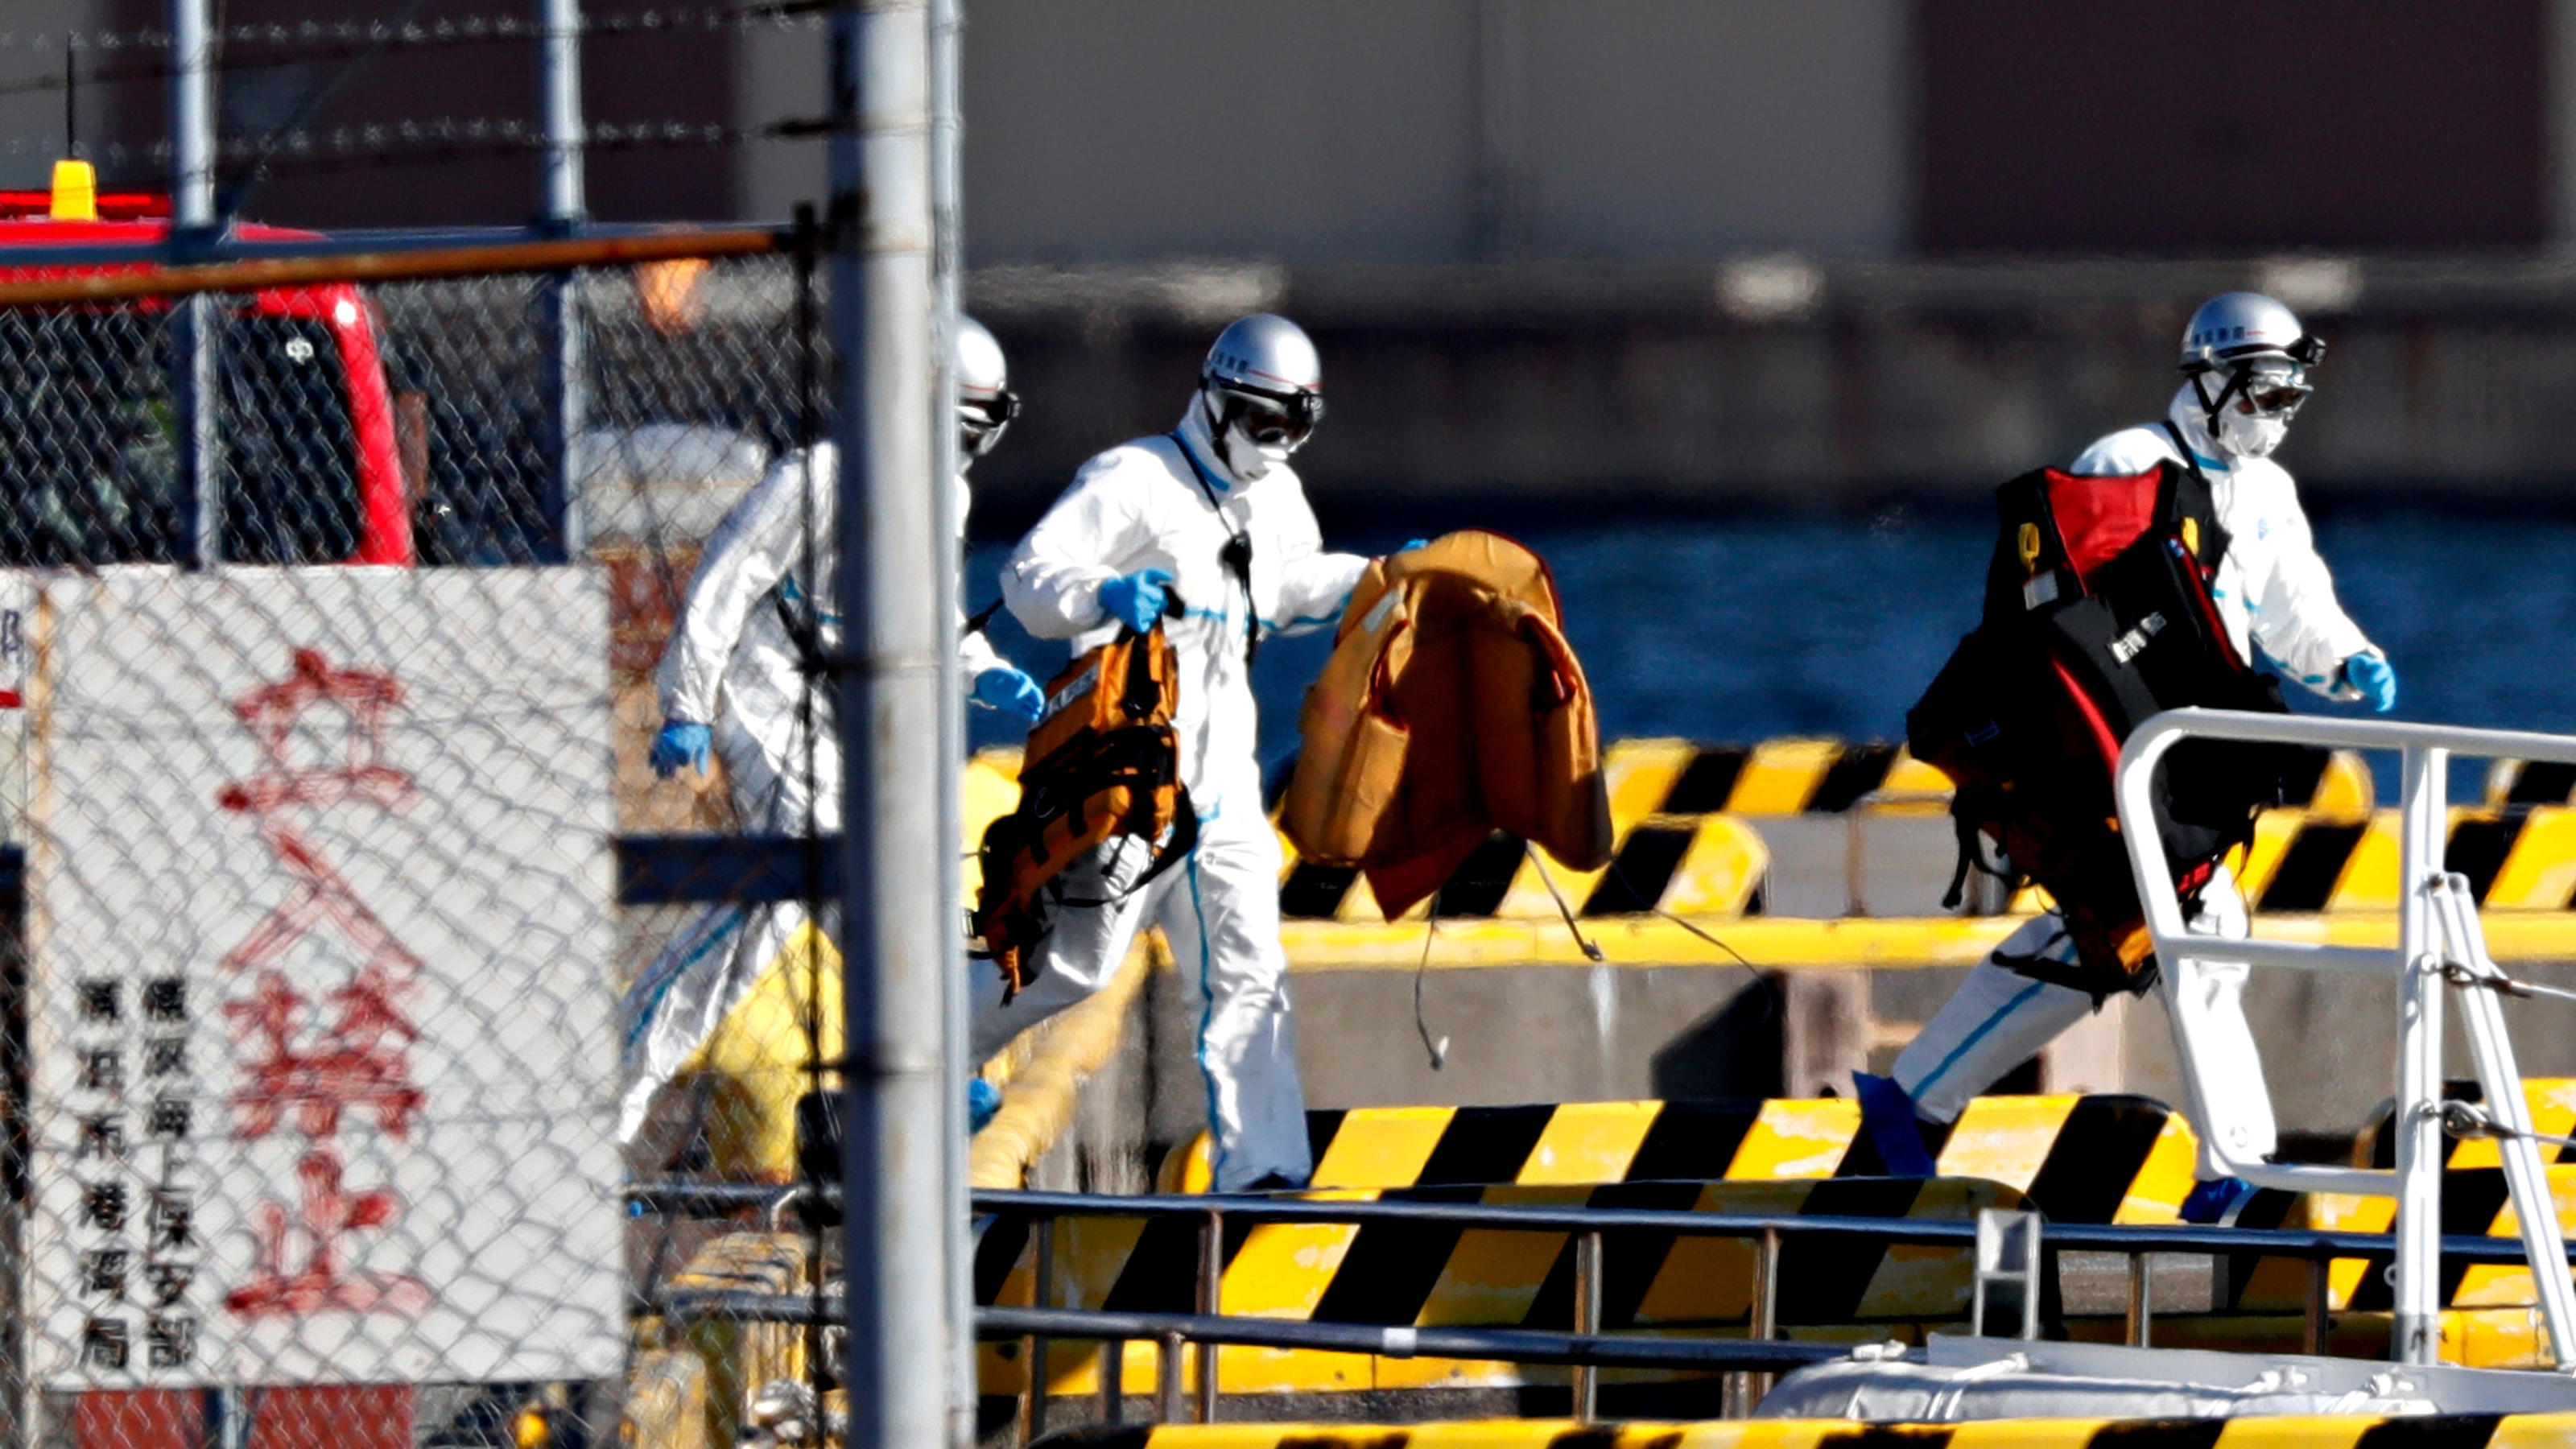 Officers in protective gears are pictured at a maritime police's base where people who were transferred from cruise ship Diamond Princess arrived in Yokohama, south of Tokyo, Japan February 5, 2020. REUTERS/Kim Kyung-Hoon